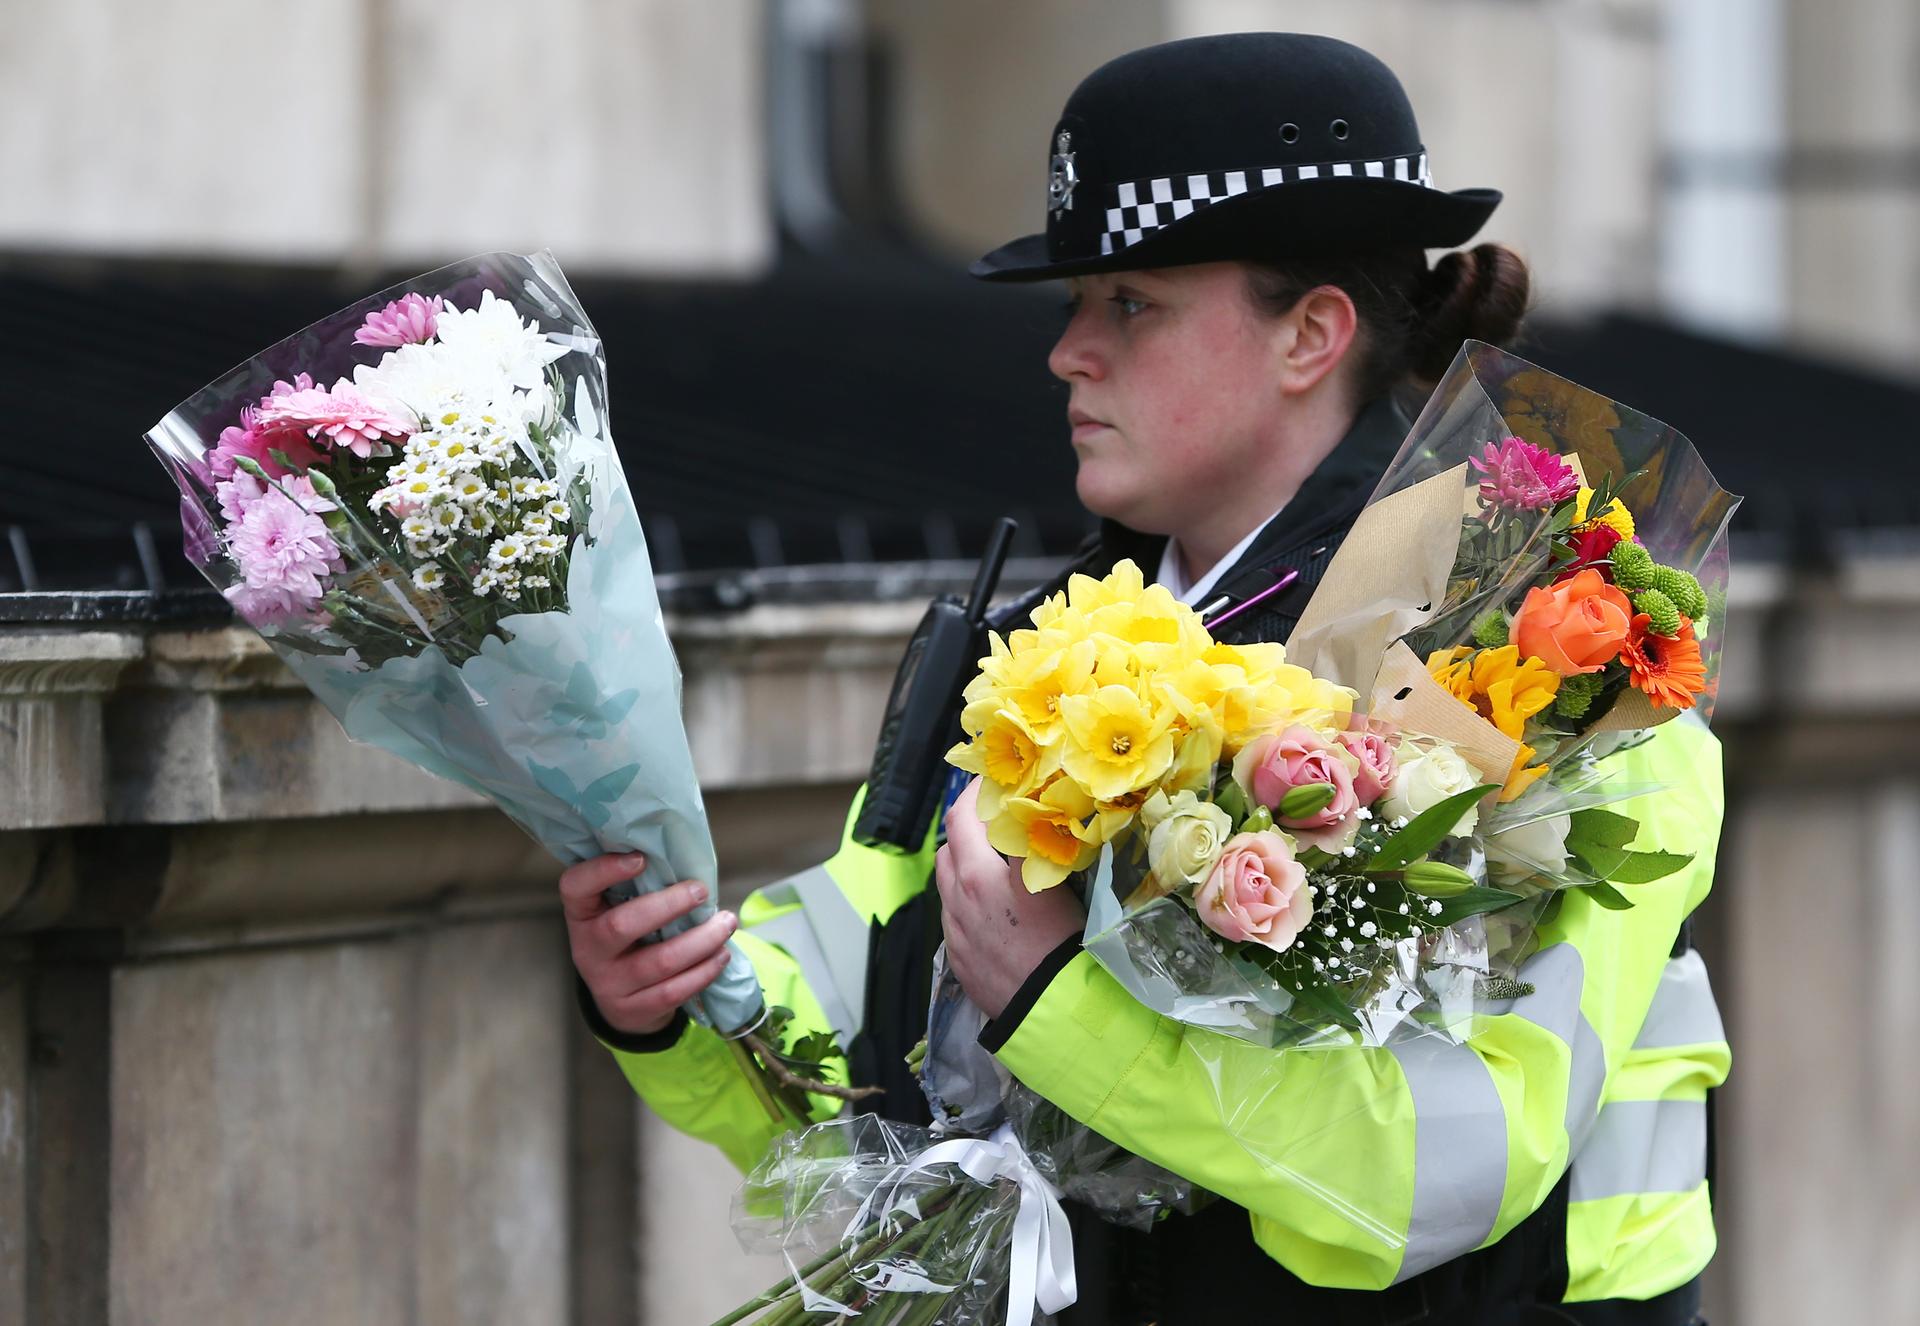 A police officer carries bouquets of flowers on Whitehall the morning after an attack in London.